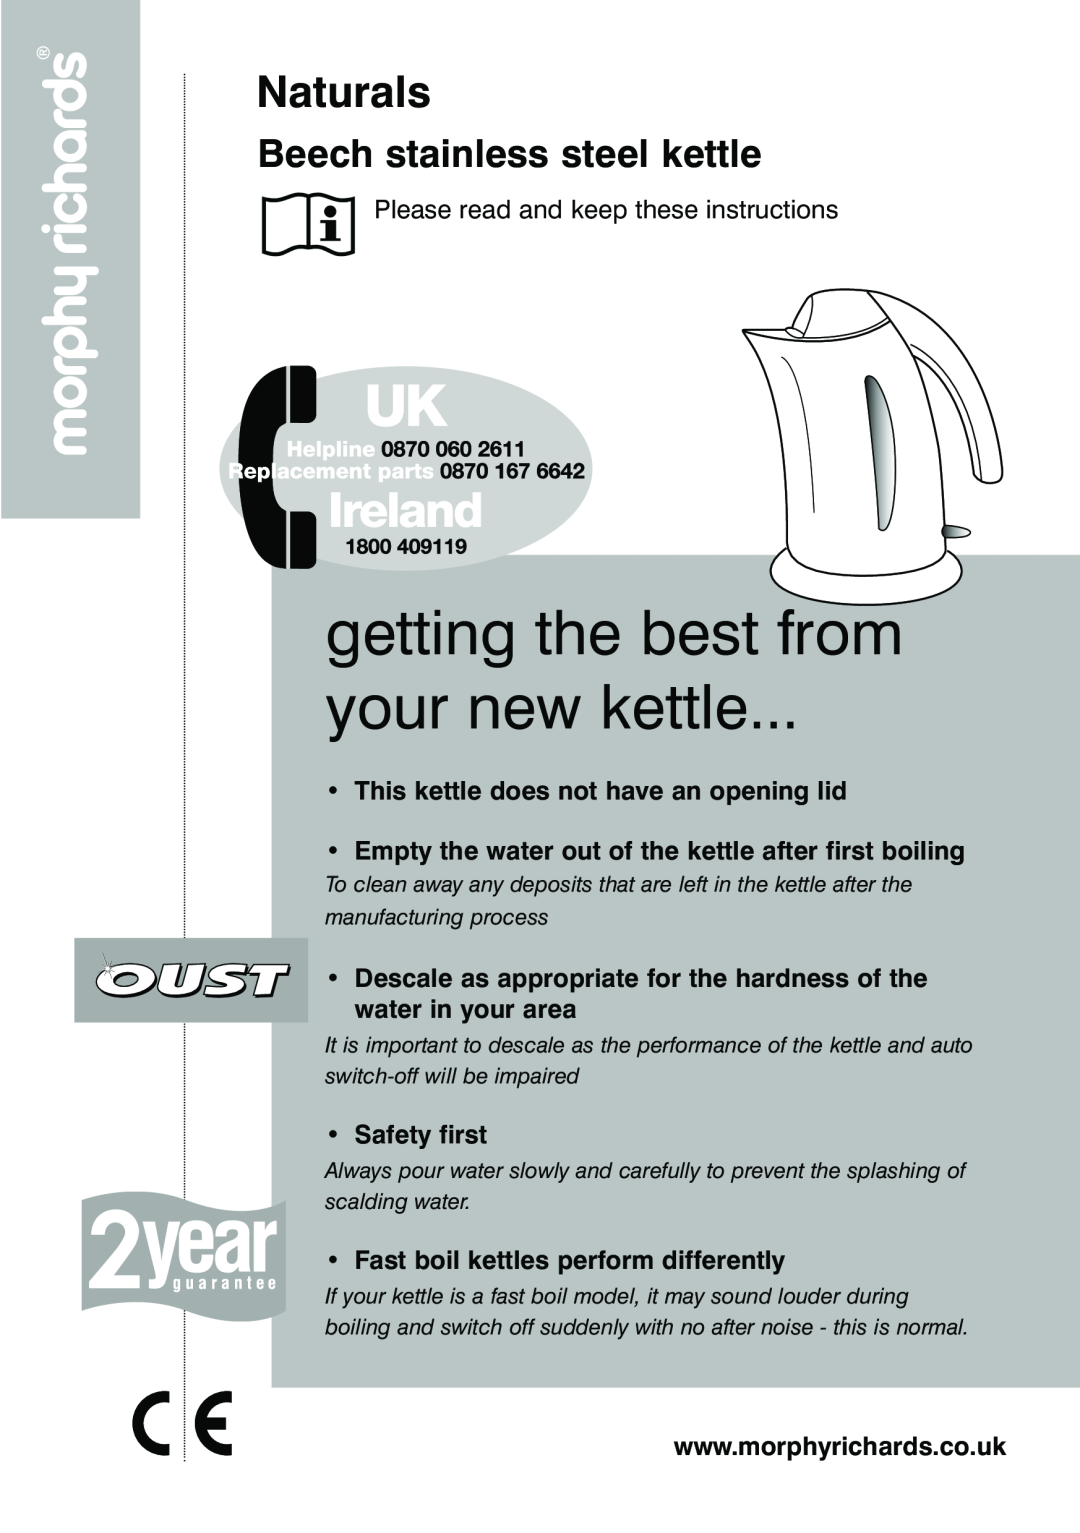 Morphy Richards Beech stainless steel kettle manual getting the best from your new kettle, Naturals 